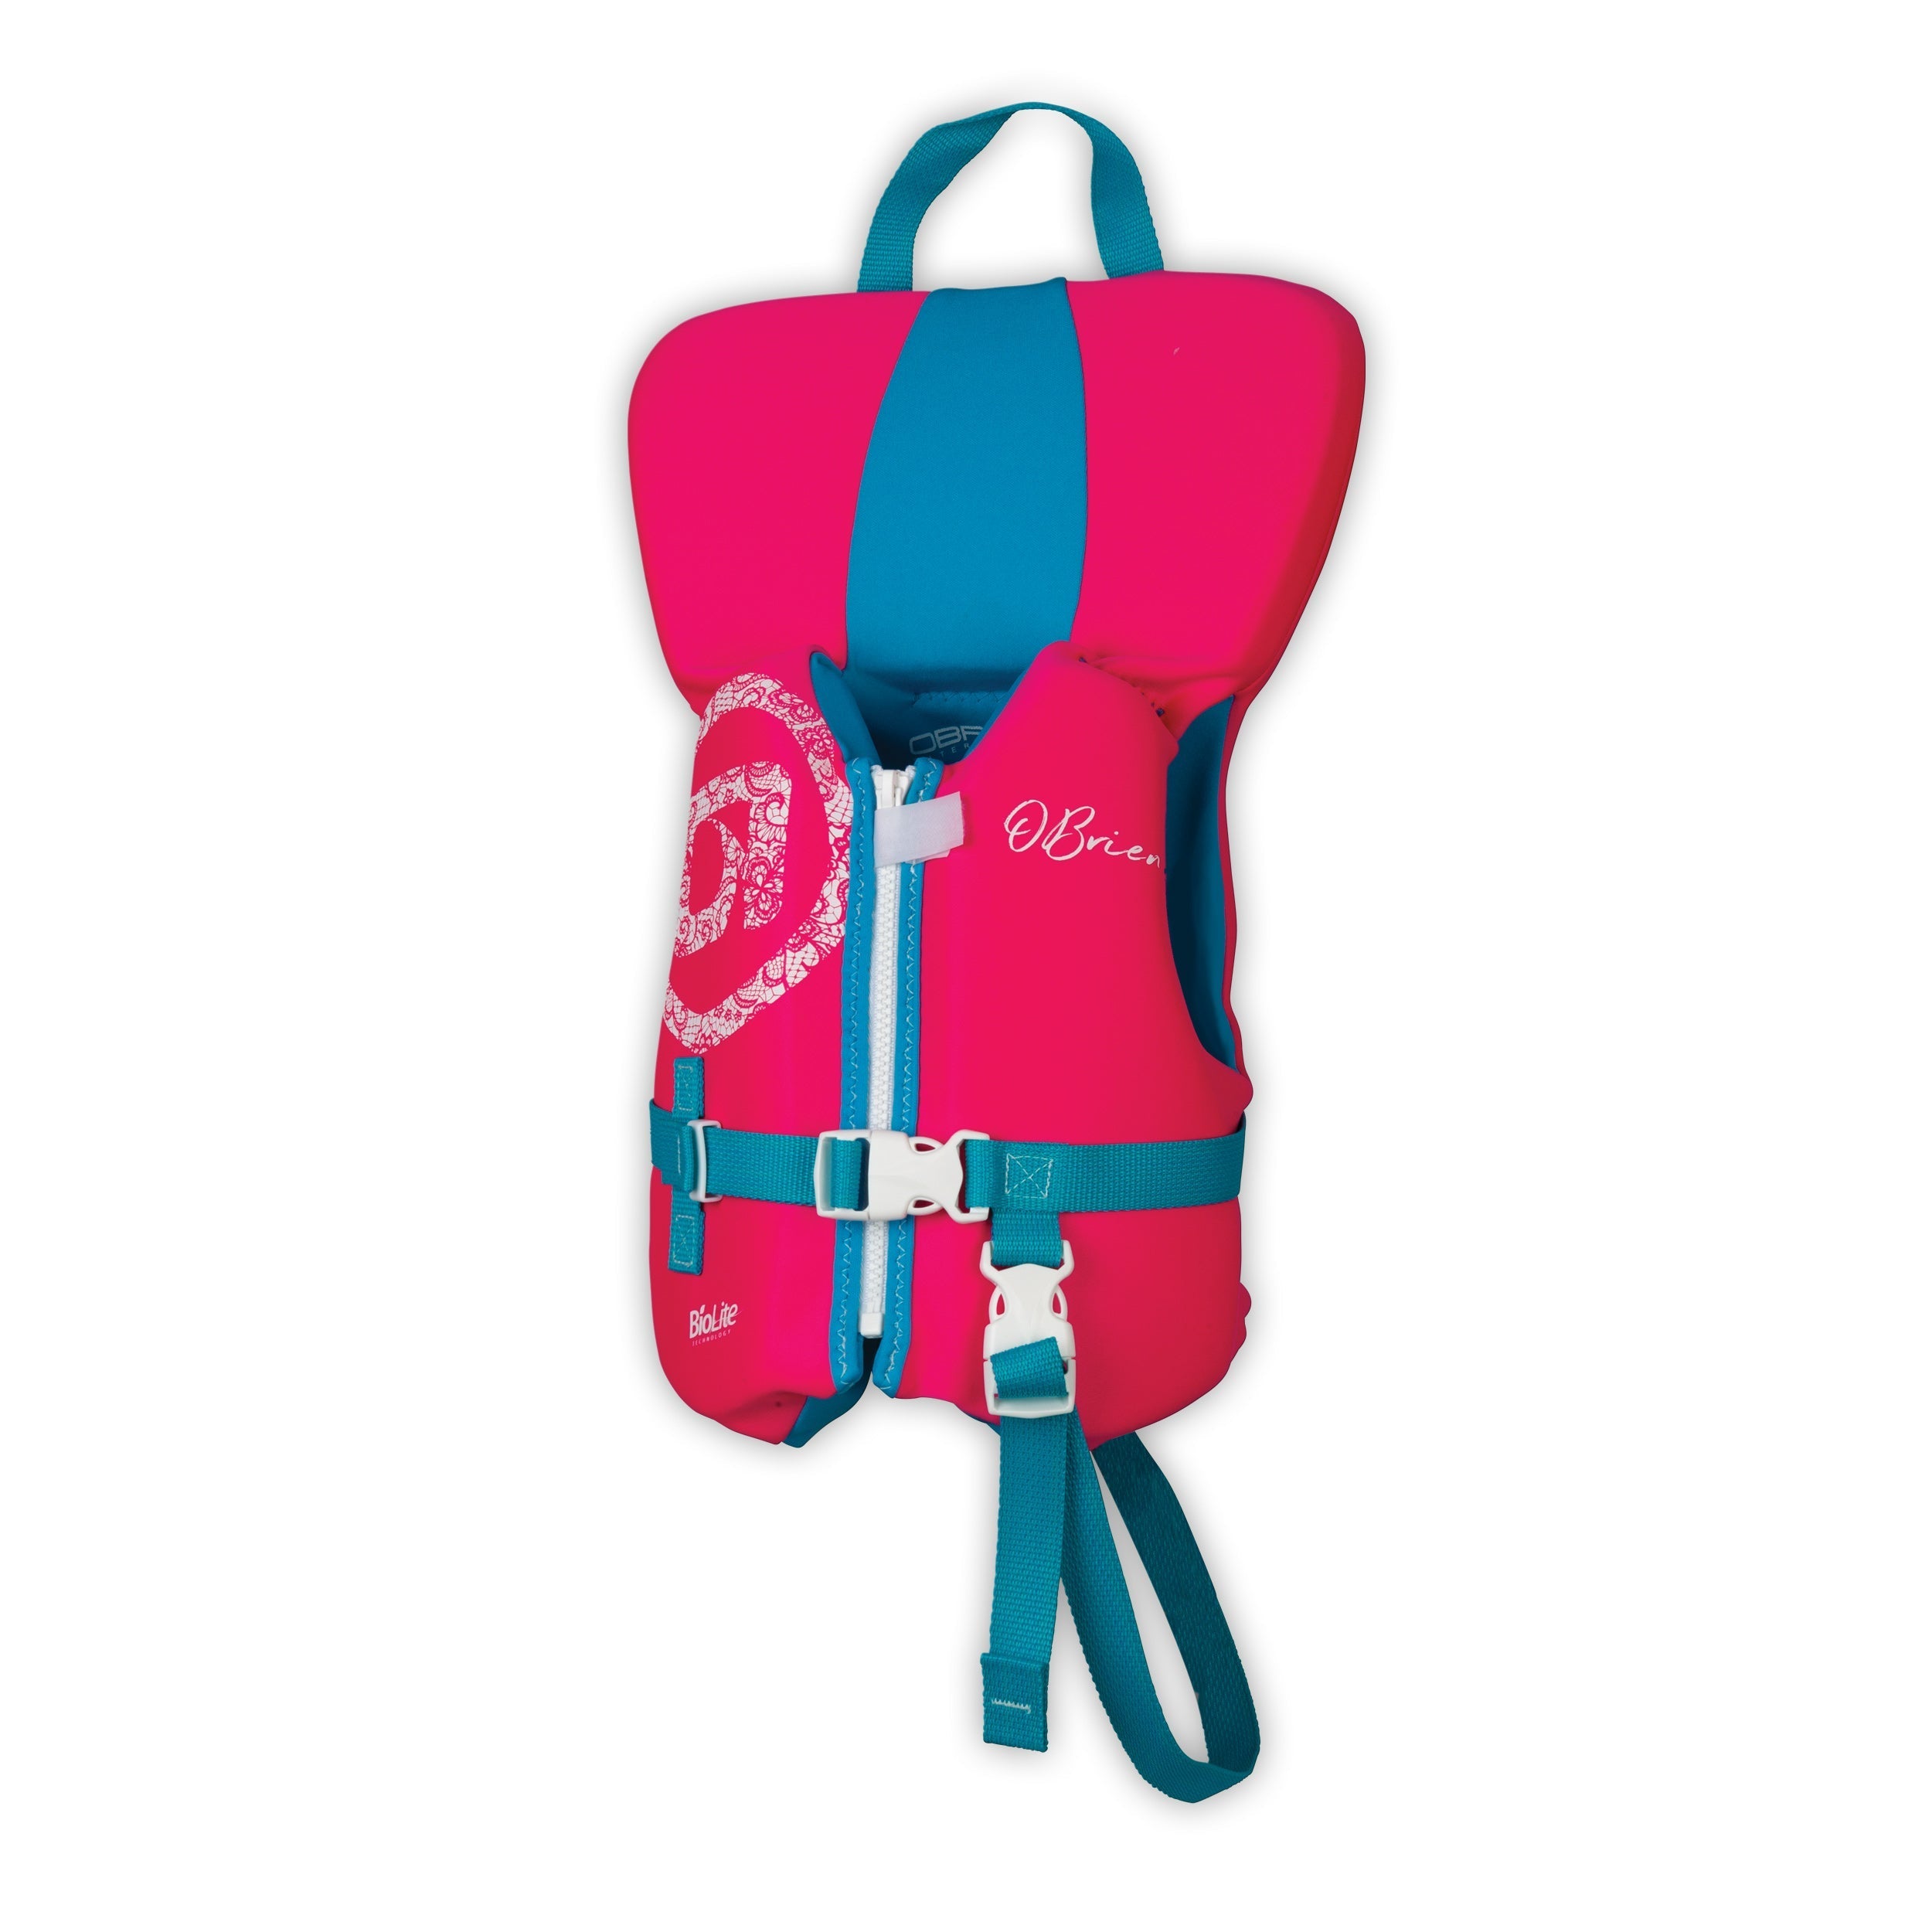 O'Brien Infant Neo Life Jacket in Pink